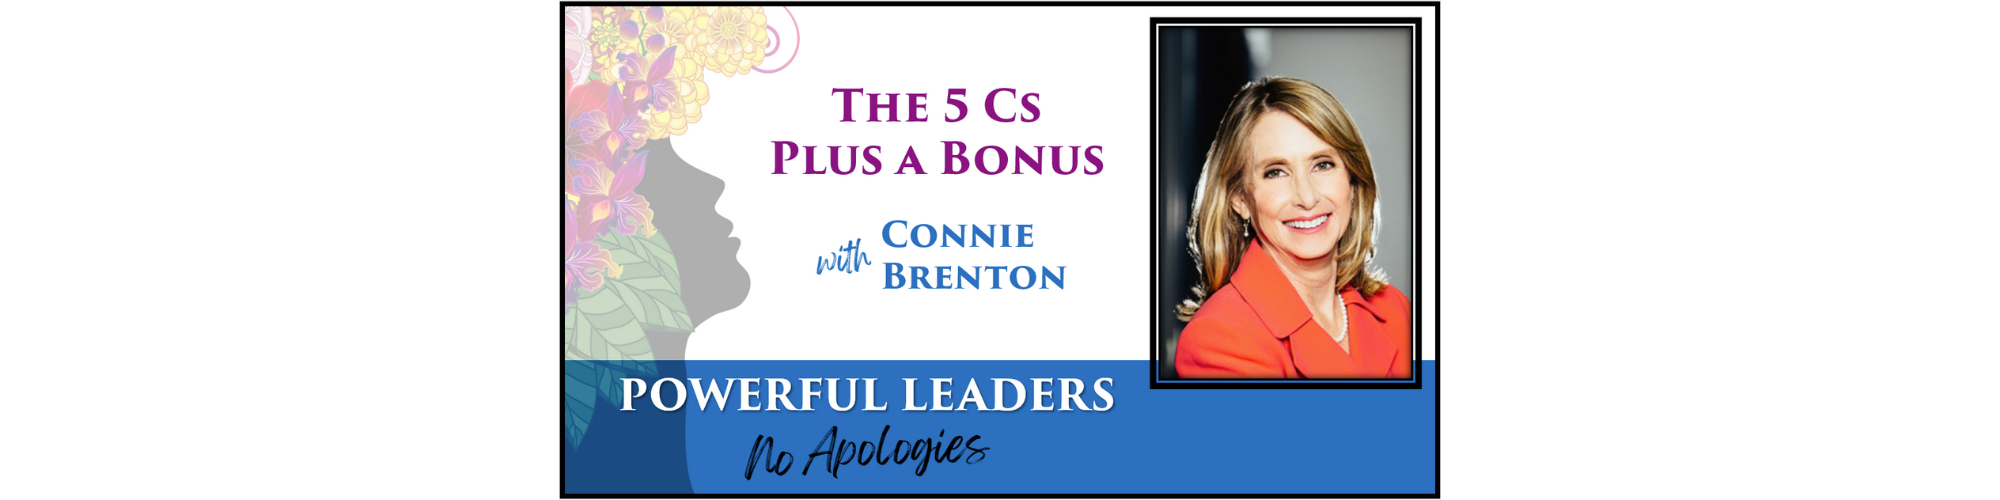 Poweful Leaders No Apologies Podcast Episode 9 with Connie Brenton